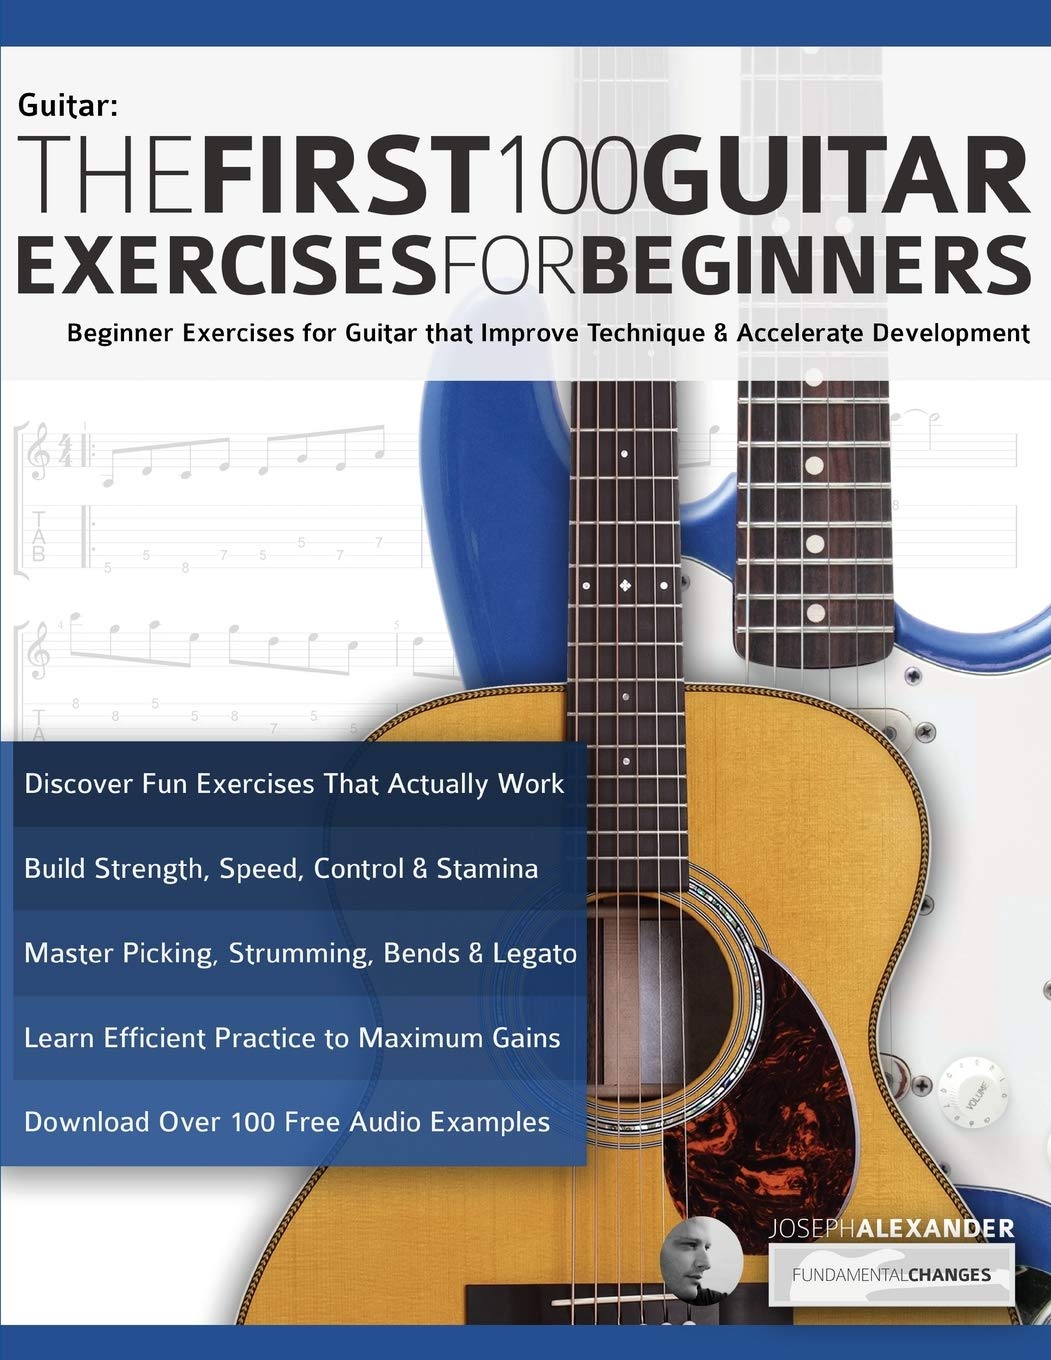 The First 100 Guitar Exercises for Beginners: Beginner Exercises for Guitar that Improve Technique and Accelerate Development